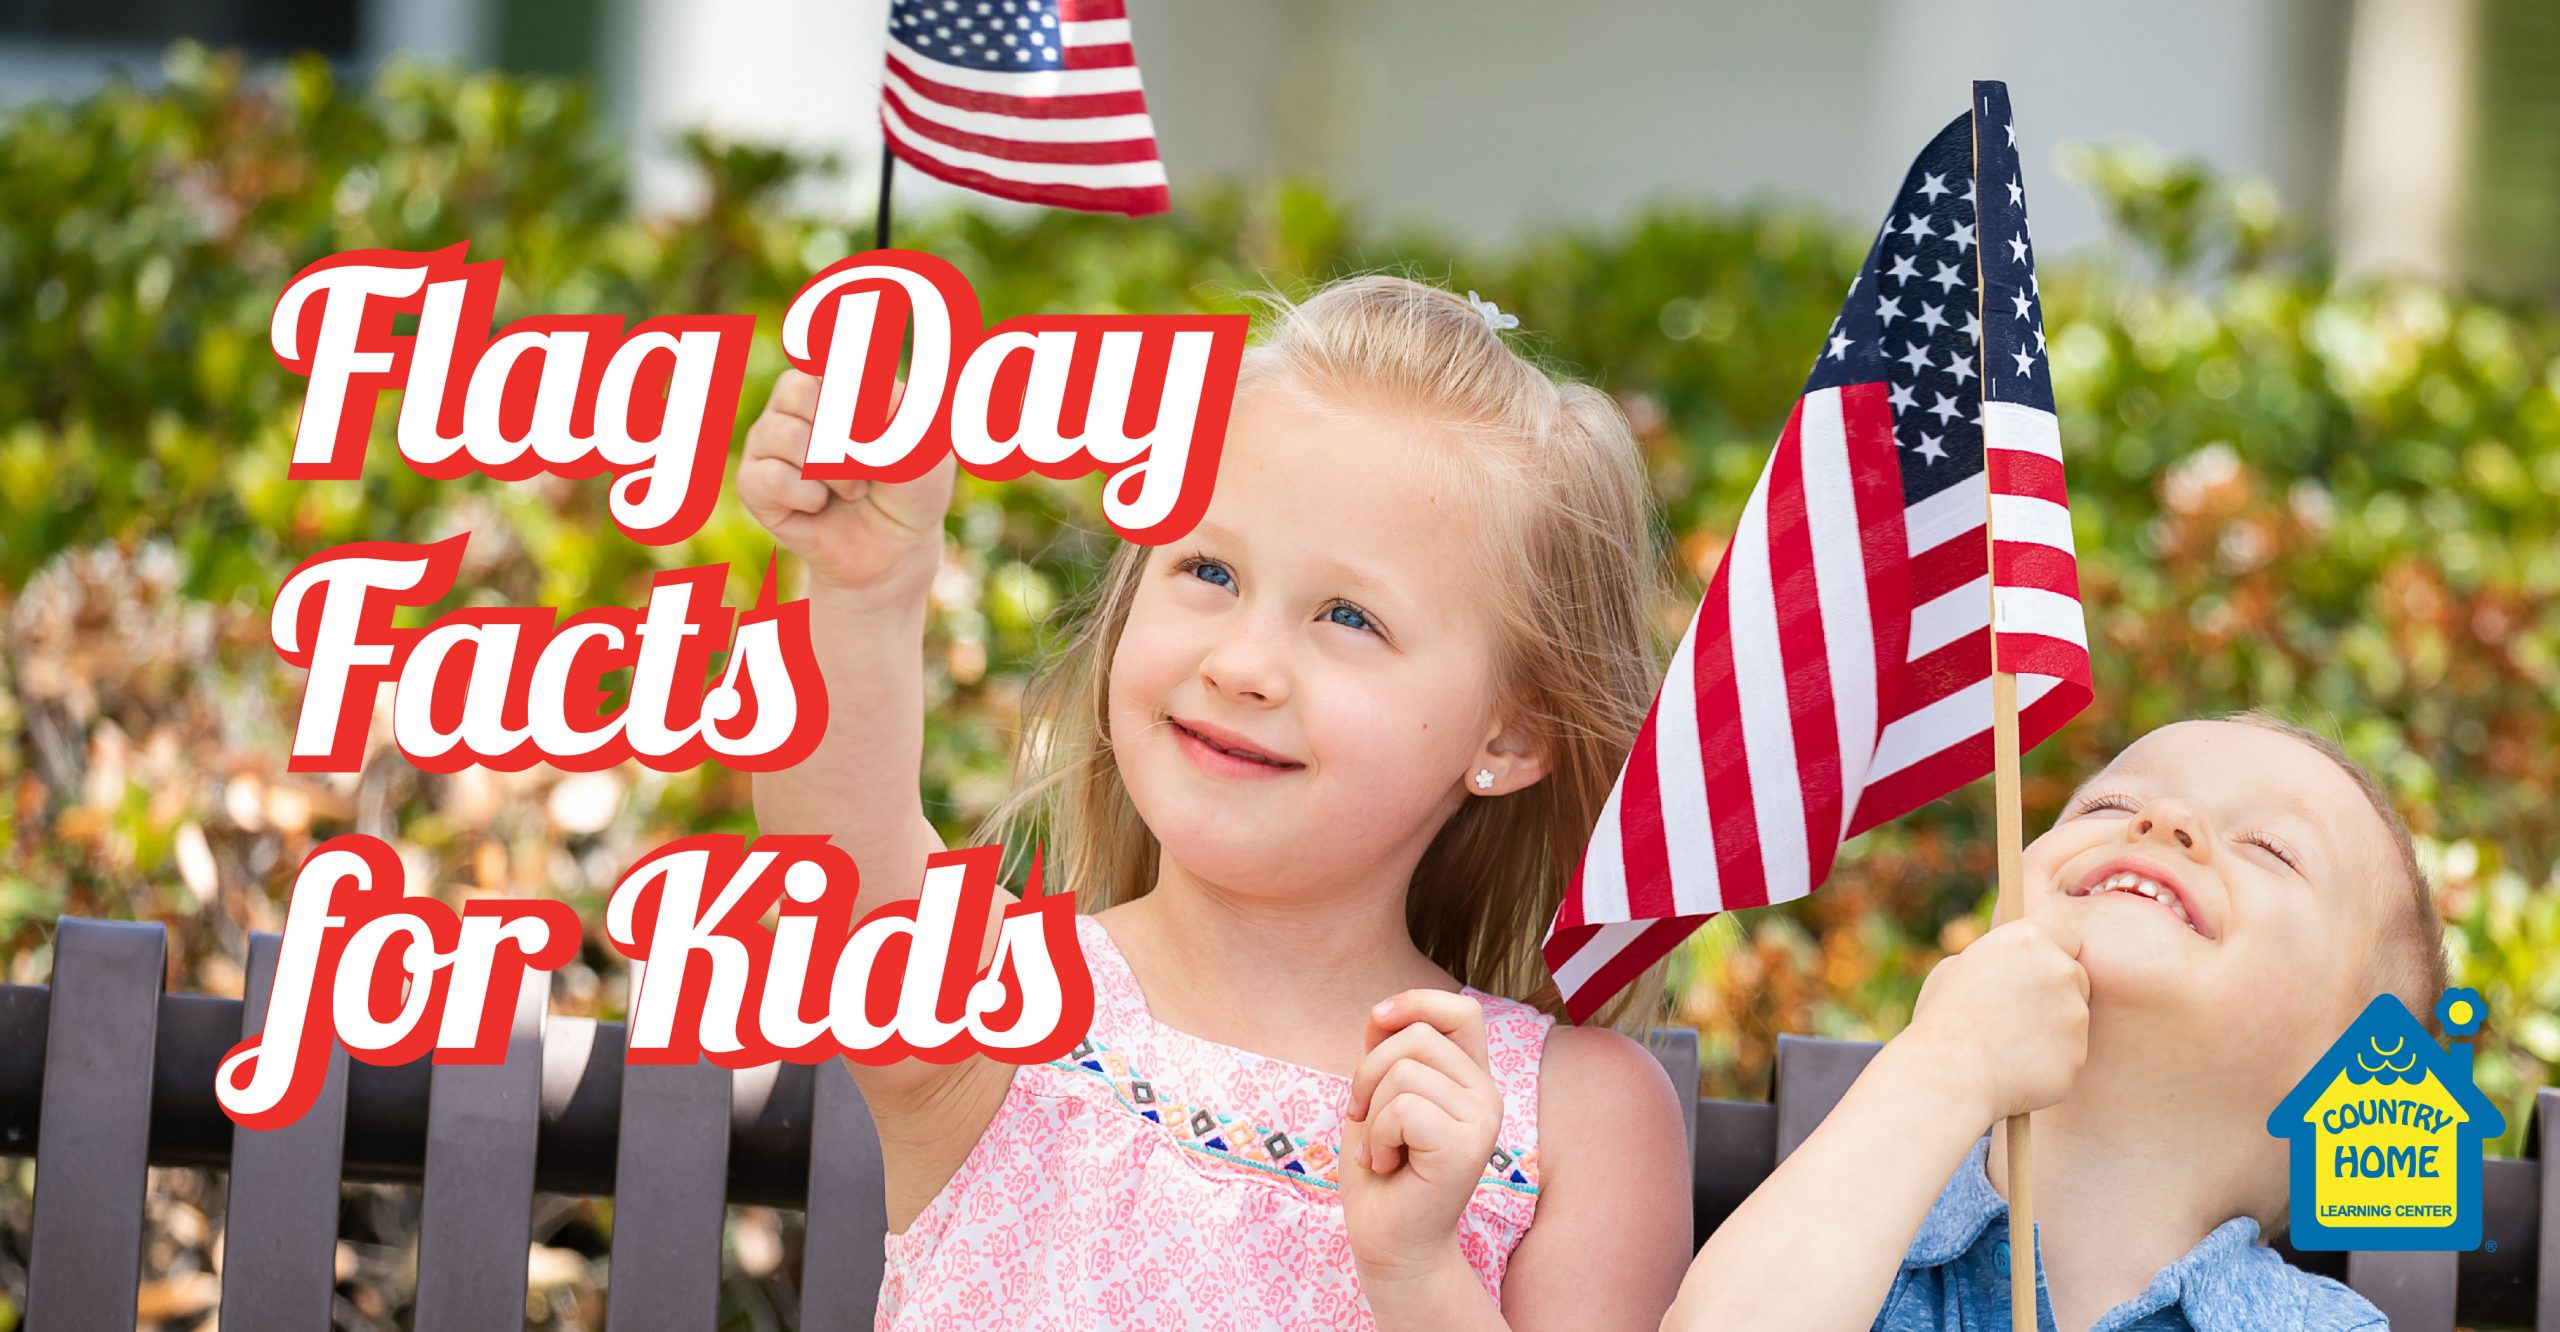 flag-day-facts-for-kids-country-home-learning-center